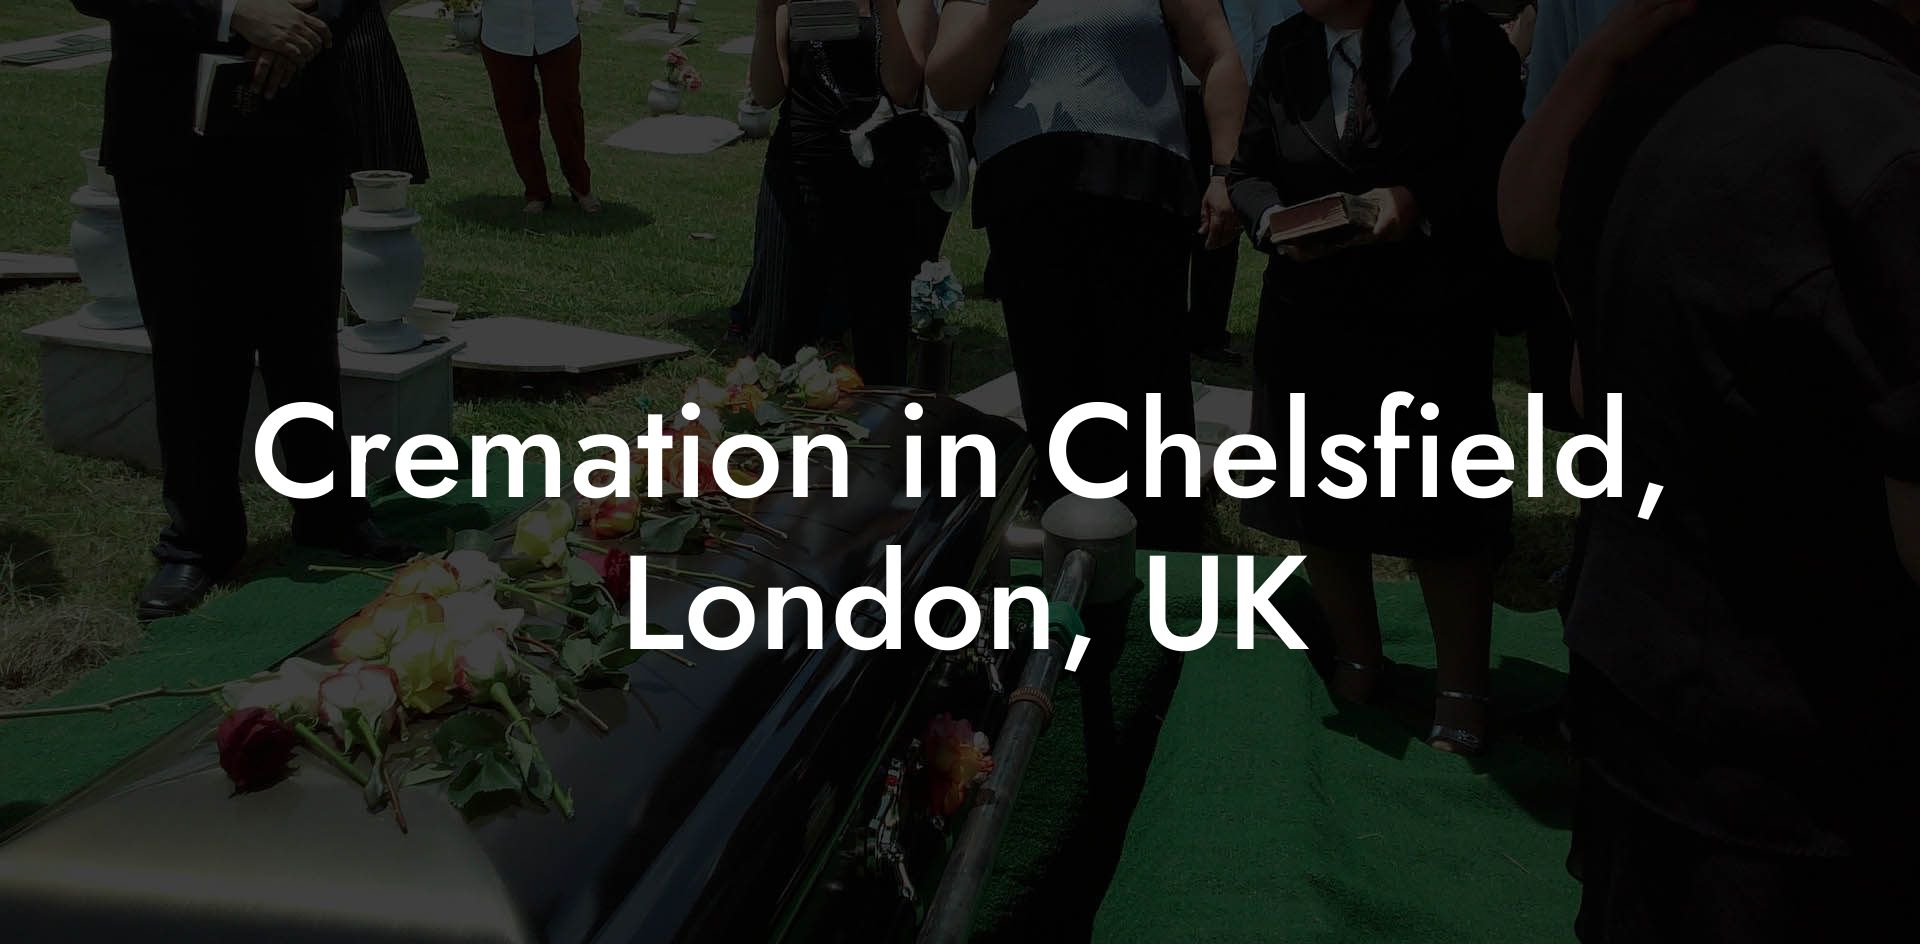 Cremation in Chelsfield, London, UK